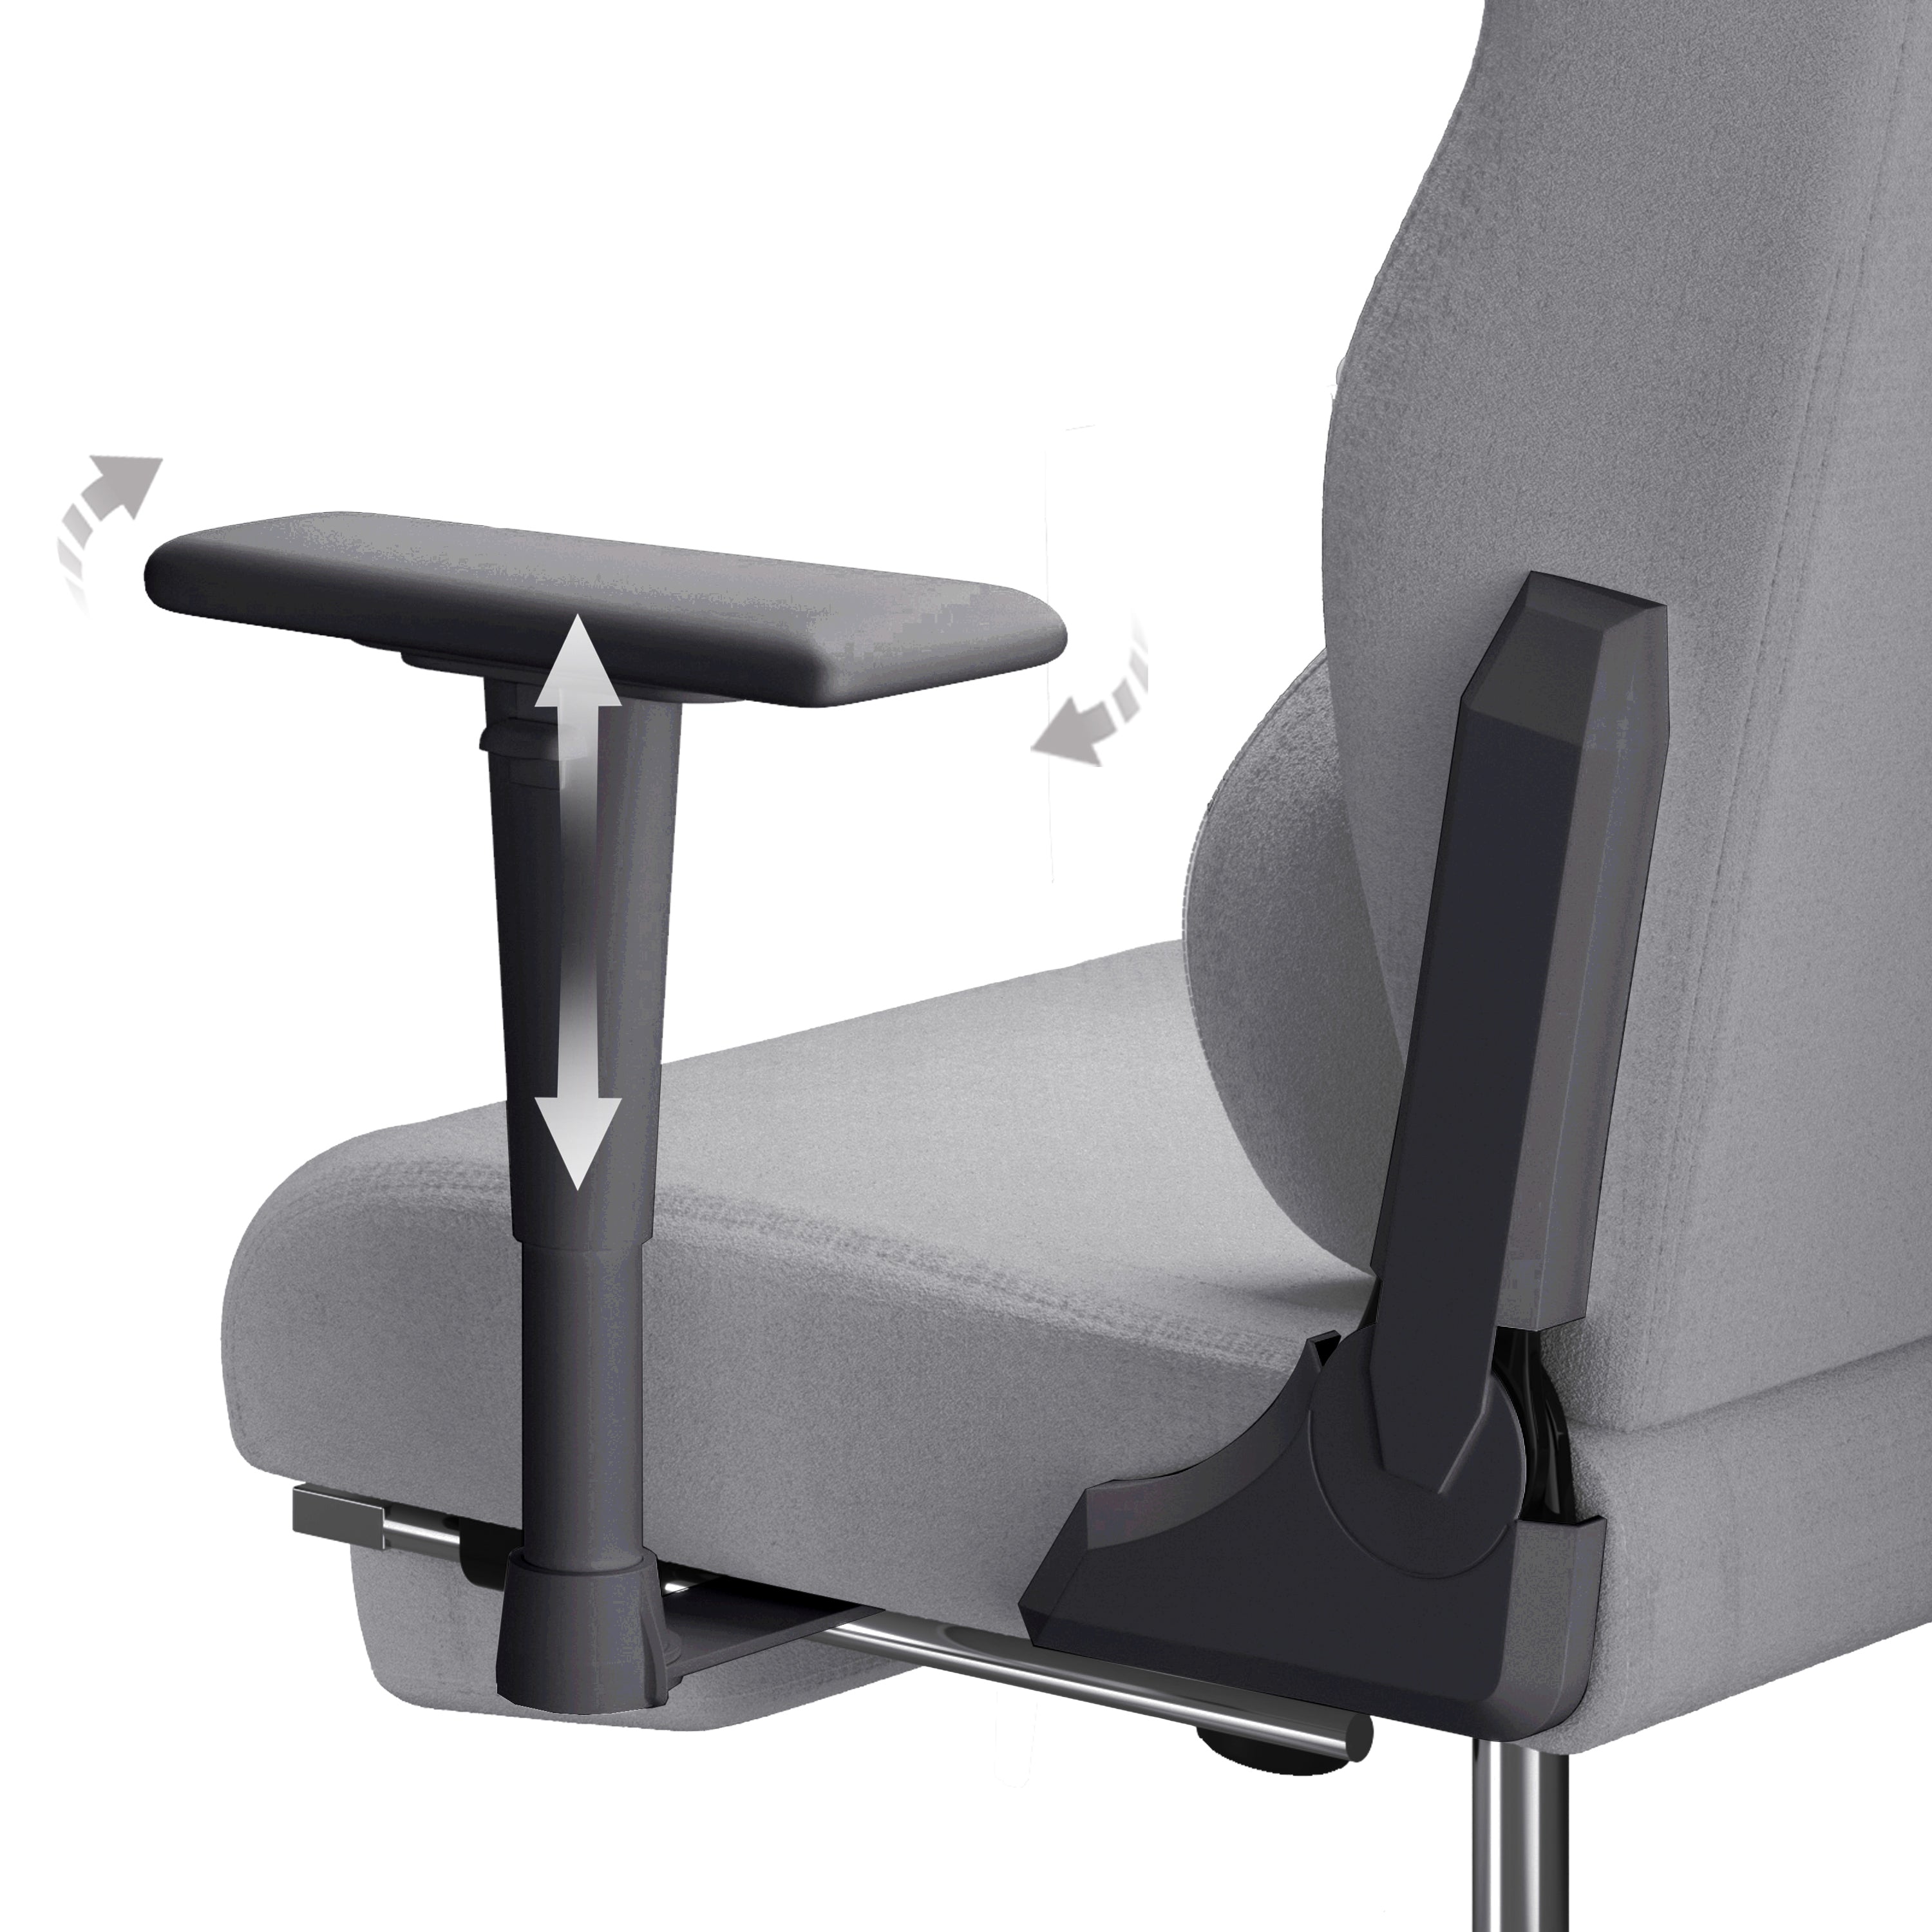 AutoFull C3 Gaming Chair, Fabric Material, With Footrest